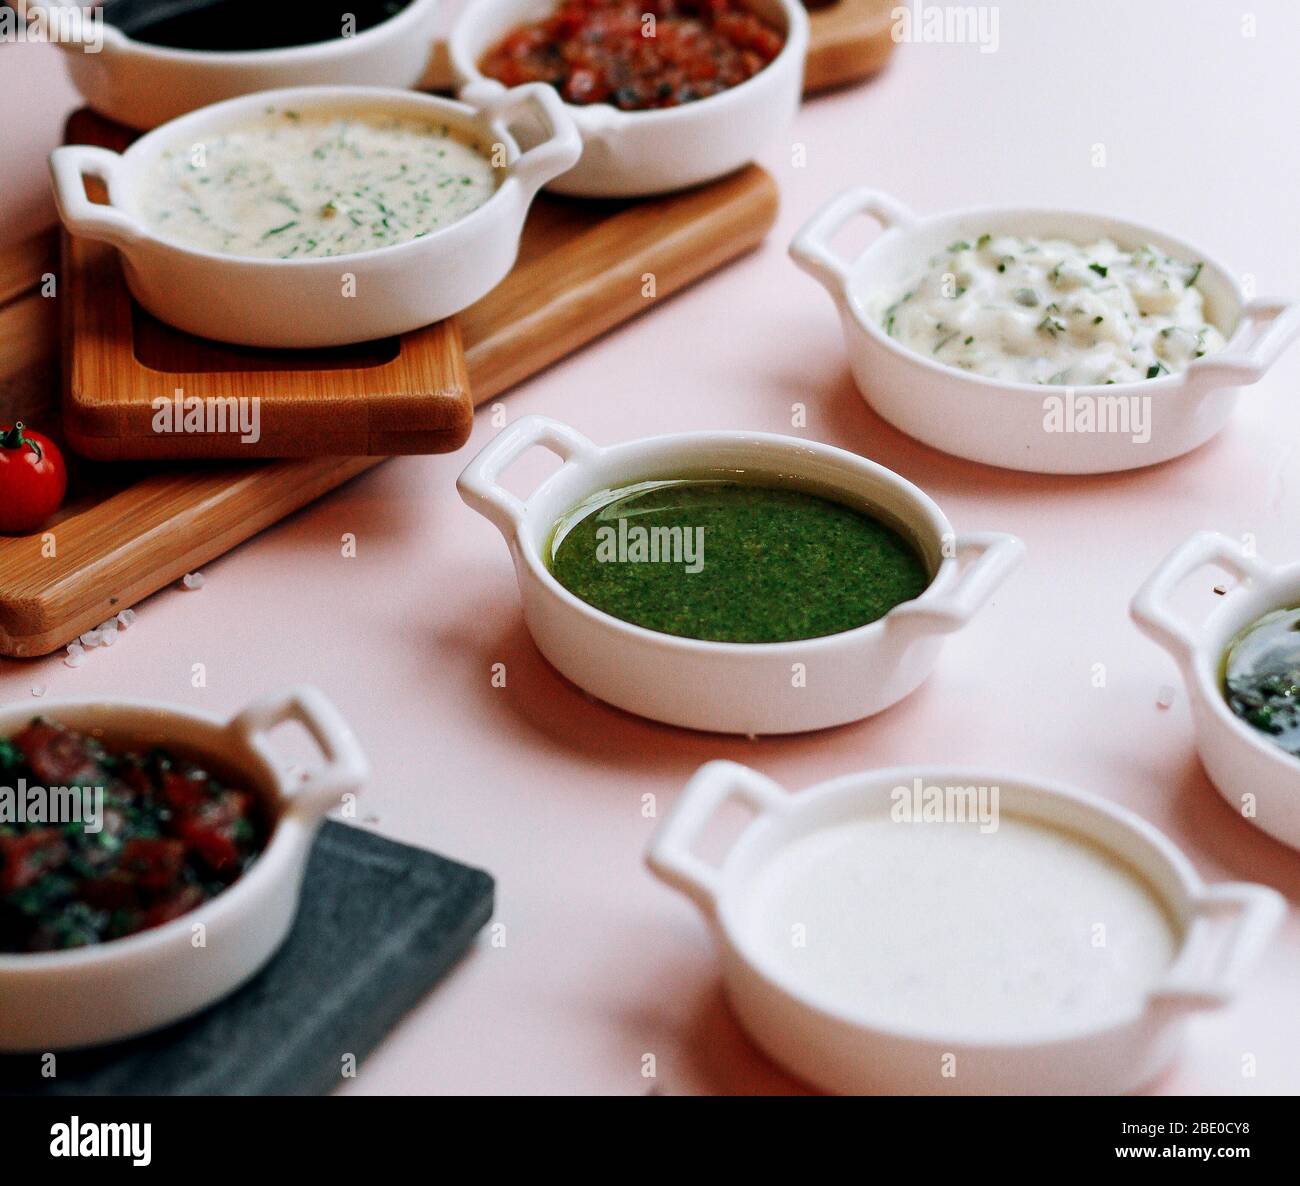 various salads and soups on the table Stock Photo